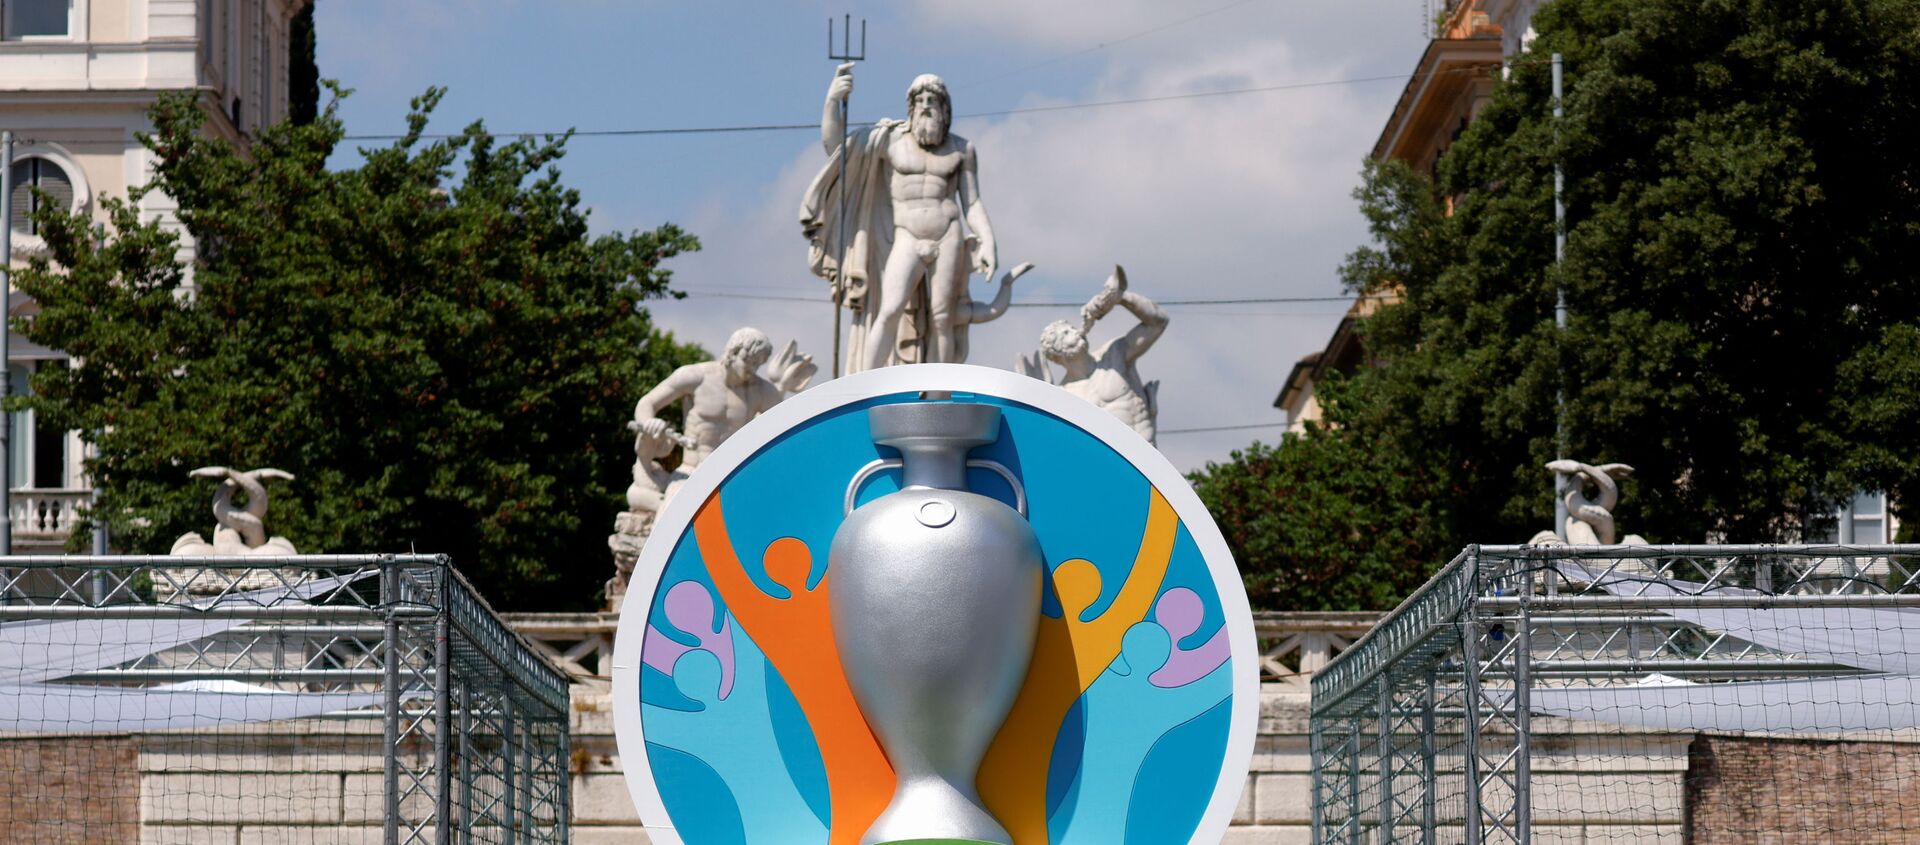 The logo of UEFA Euro 2020 is seen at the fan zone at Piazza del Popolo in Rome, Italy, June 7, 2021 - Sputnik International, 1920, 26.06.2021